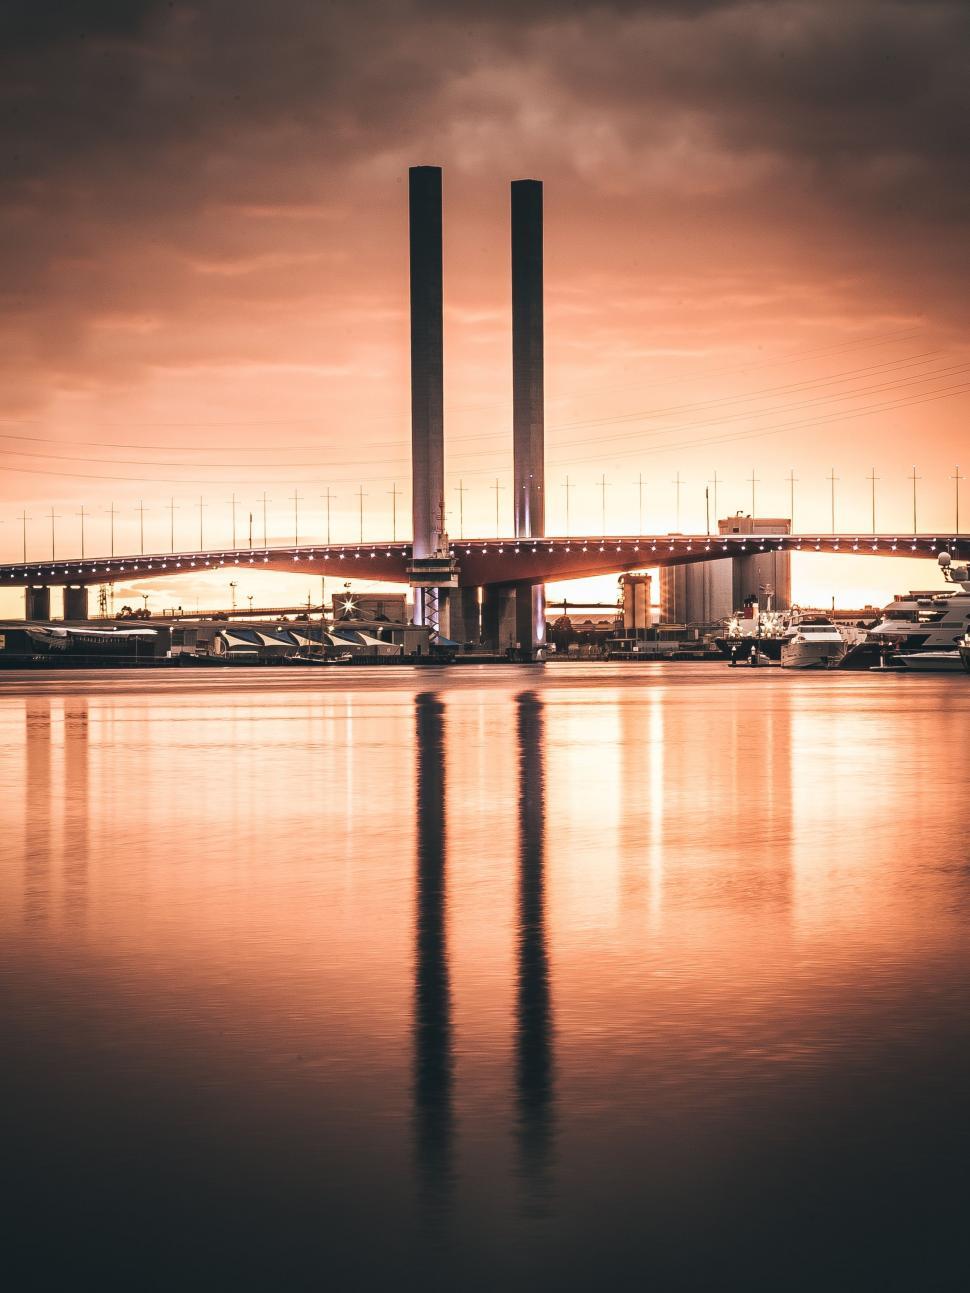 Free Image of Bridge Over a Large Body of Water 